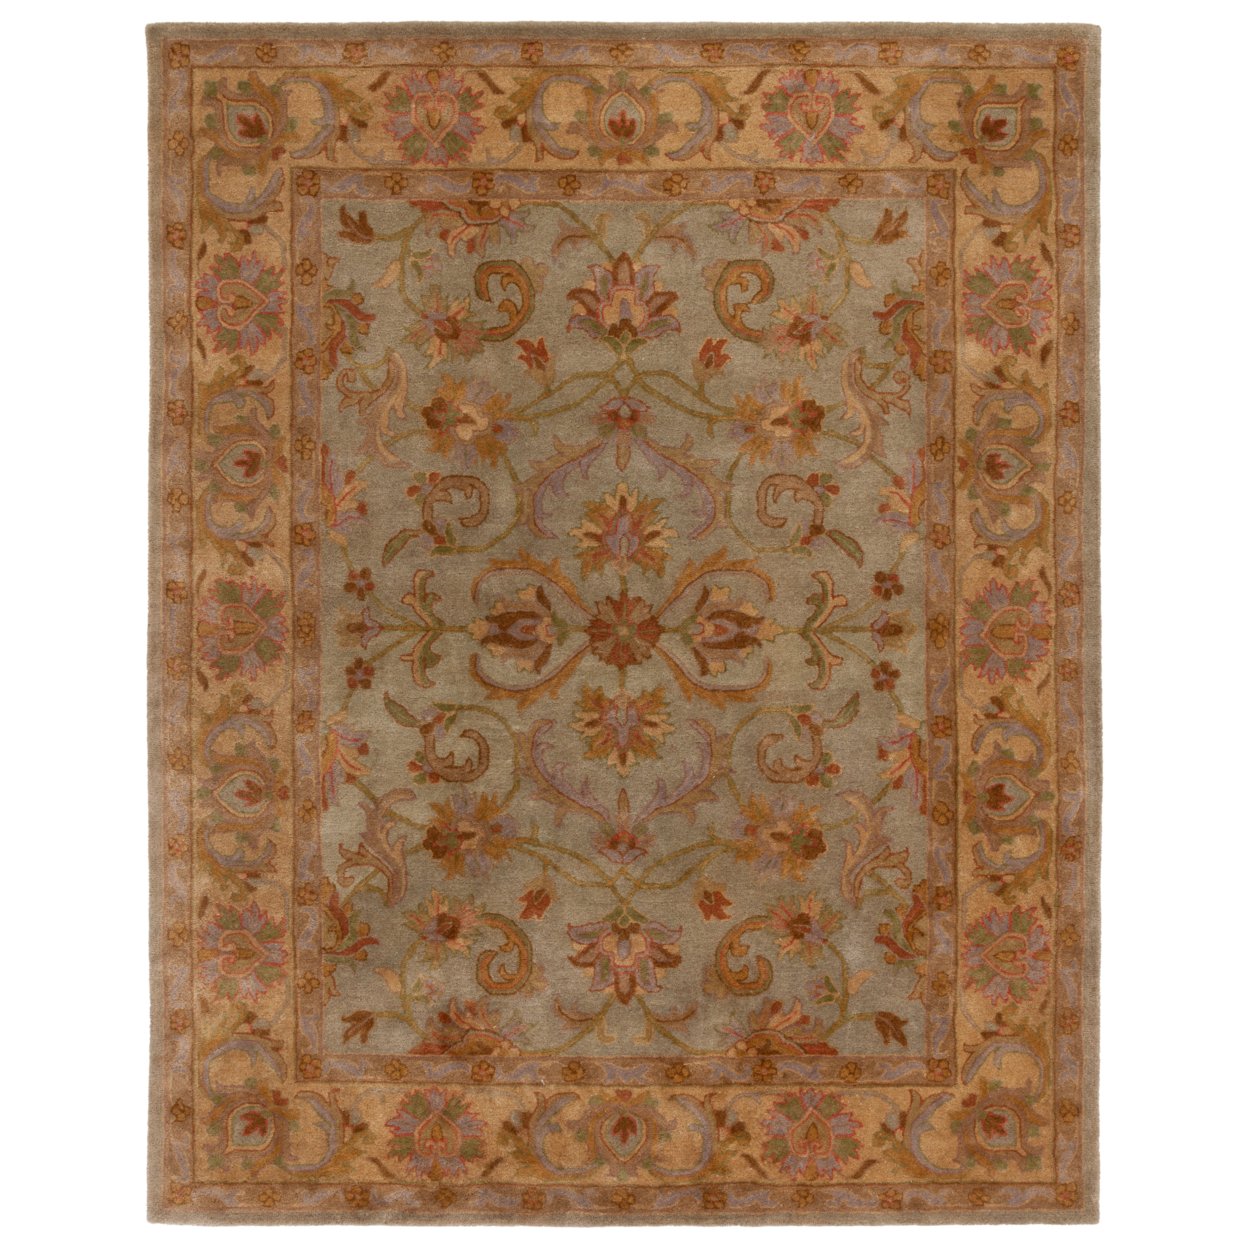 Safavieh HG811A Heritage Green / Gold - 6' Square